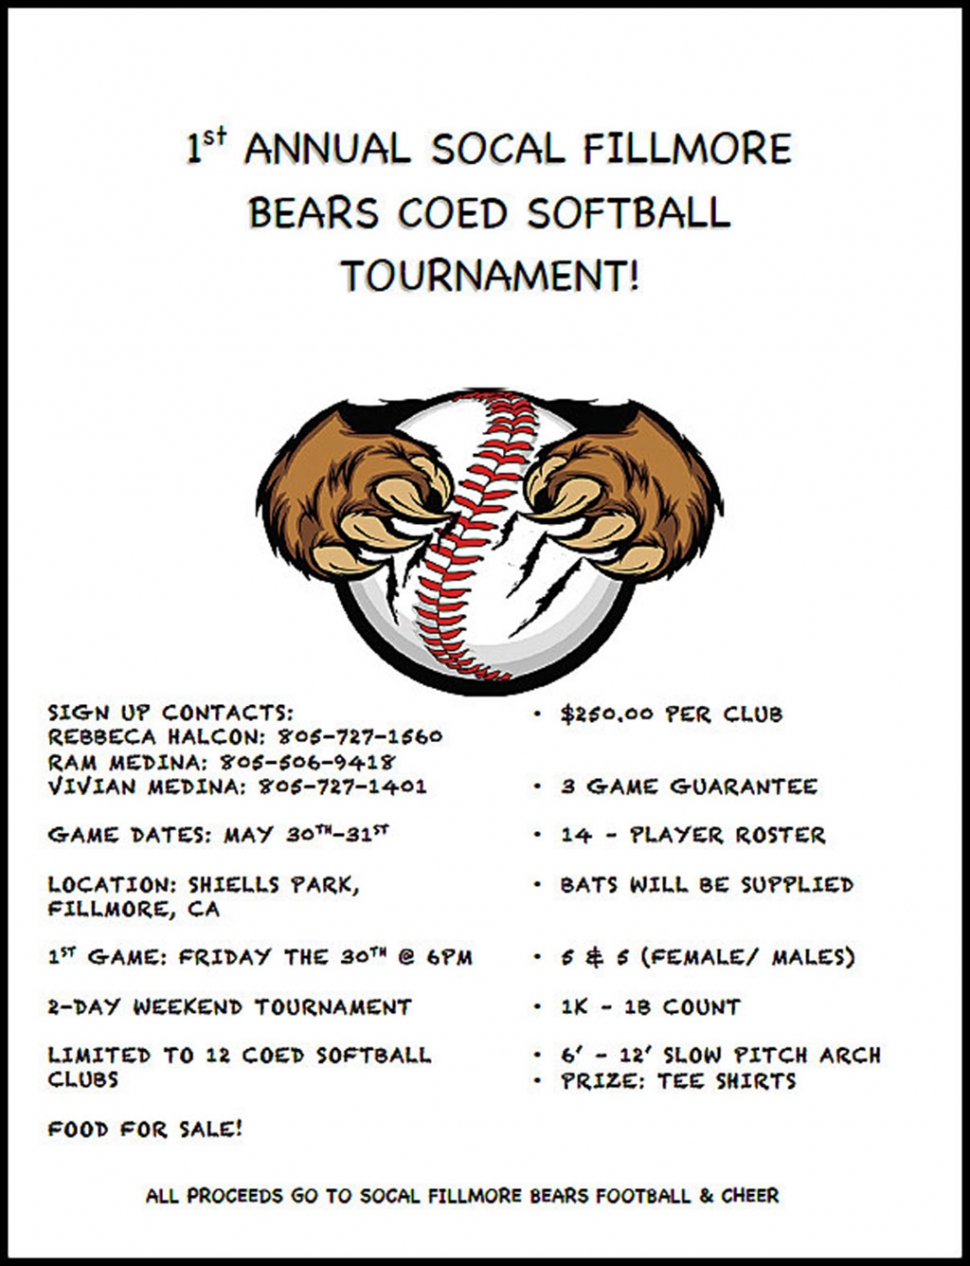 On May 30 & 31st So Cal Fillmore Bears will be hosting our first annual softball tournament. 